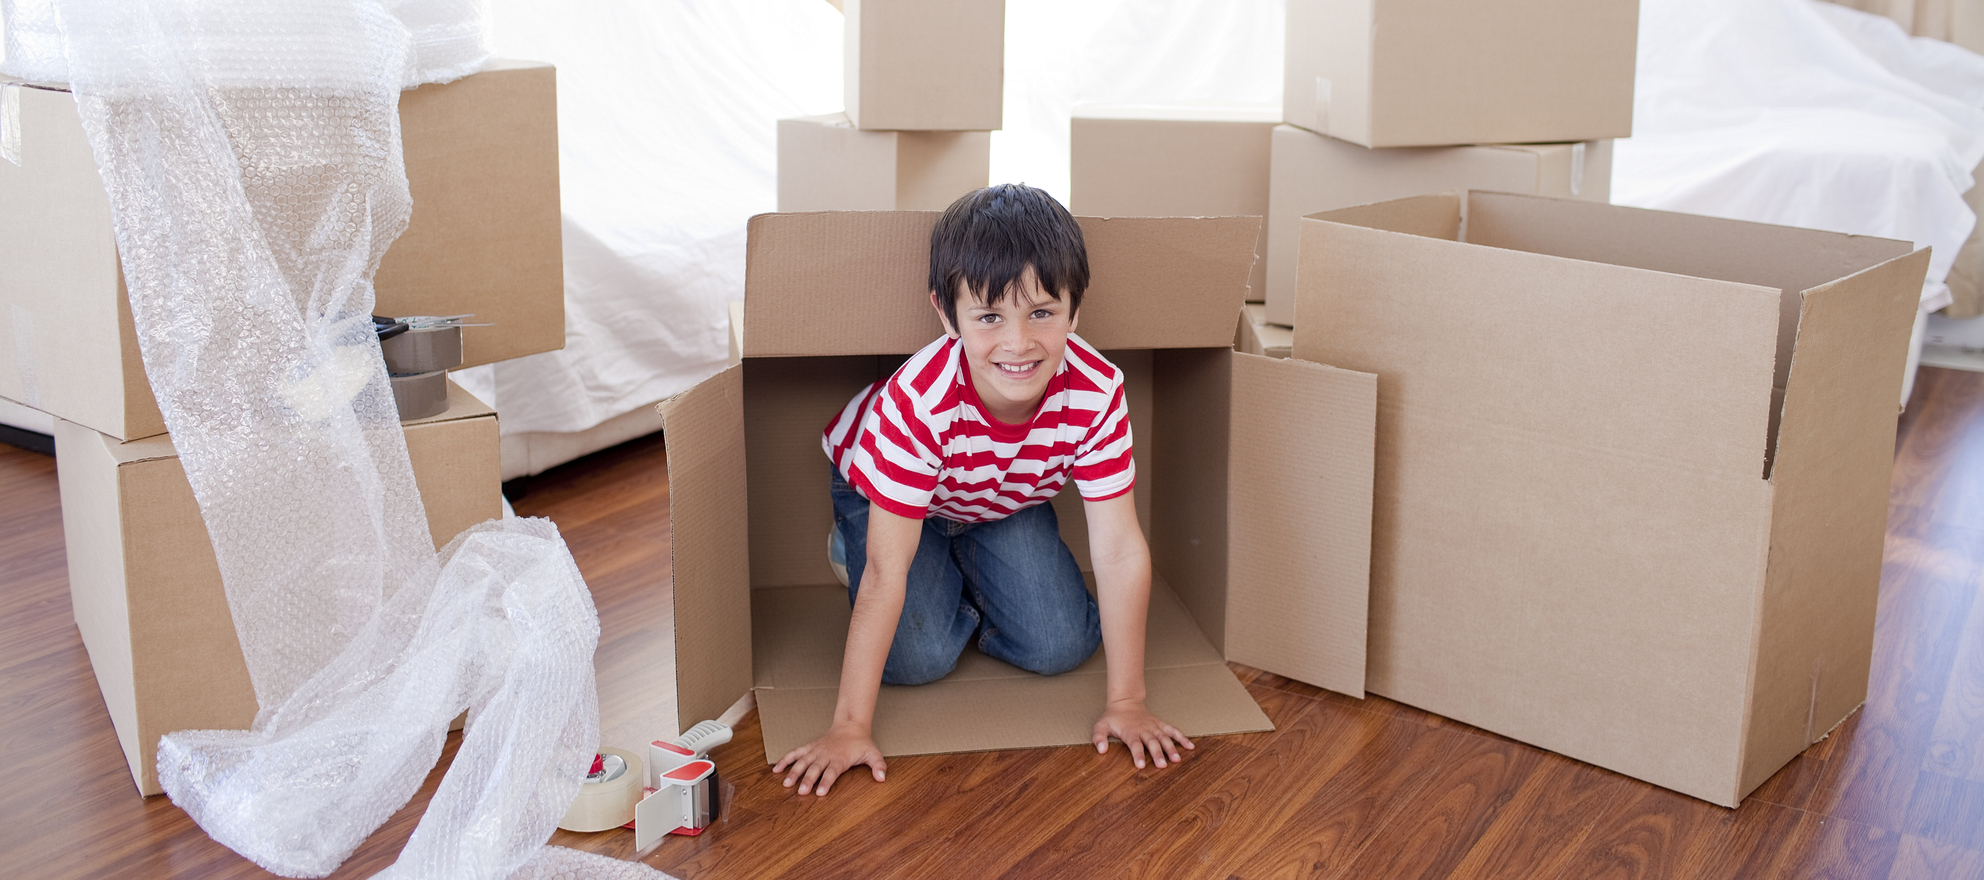 A child playing in moving boxes